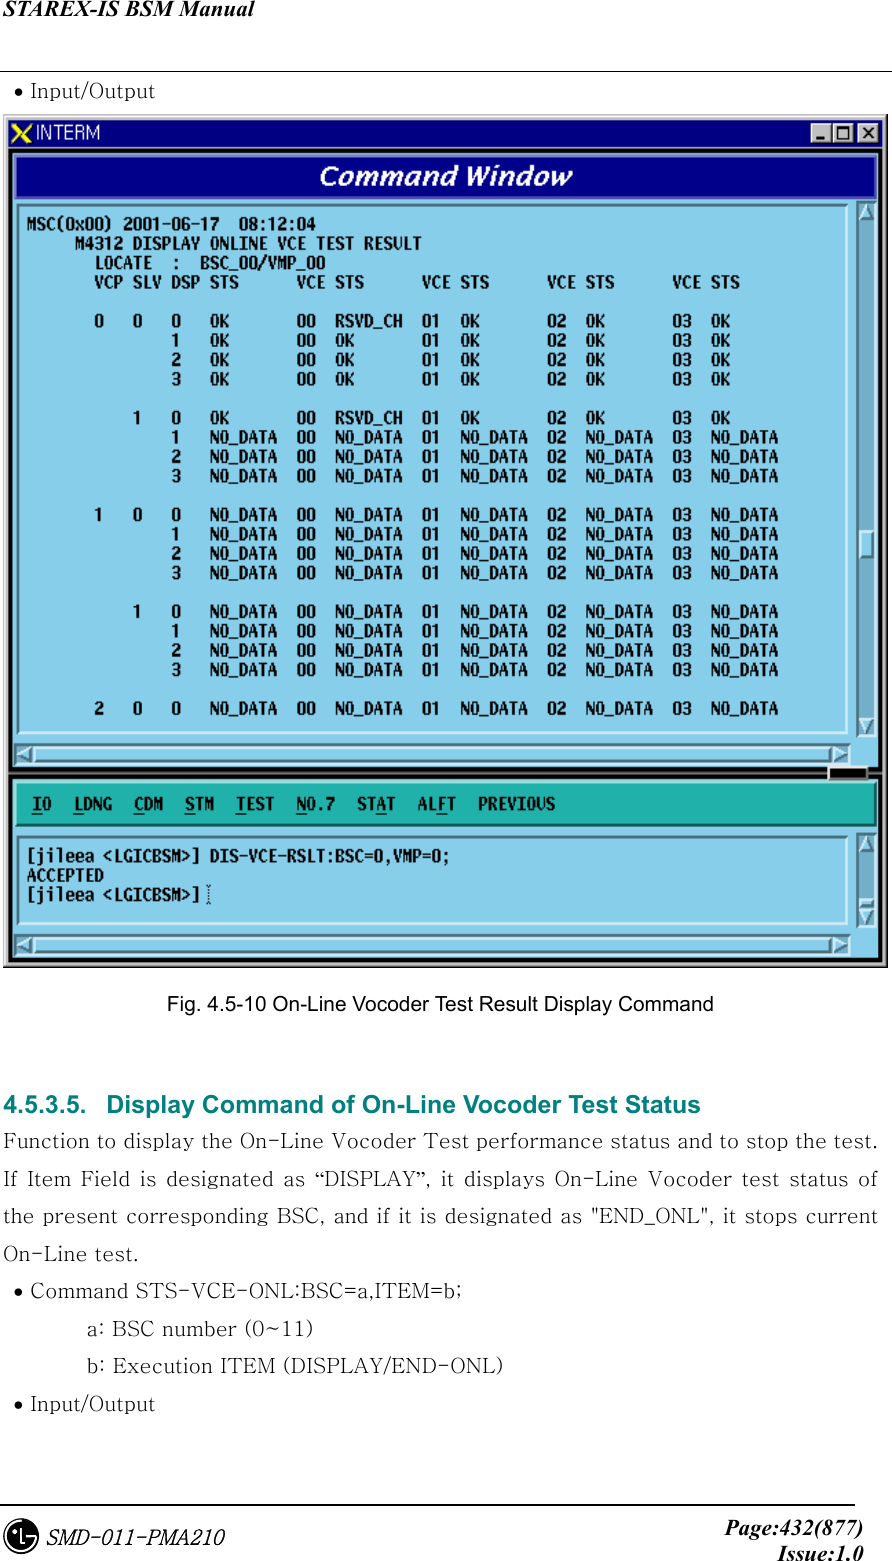 STAREX-IS BSM Manual     Page:432(877)Issue:1.0SMD-011-PMA210  • Input/Output  Fig. 4.5-10 On-Line Vocoder Test Result Display Command  4.5.3.5.   Display Command of On-Line Vocoder Test Status Function to display the On-Line Vocoder Test performance status and to stop the test. If  Item Field  is  designated as  “DISPLAY”, it  displays On-Line  Vocoder  test status of the present corresponding BSC, and if it is designated as &quot;END_ONL&quot;, it stops current On-Line test.    • Command STS-VCE-ONL:BSC=a,ITEM=b;   a: BSC number (0~11)   b: Execution ITEM (DISPLAY/END-ONL)  • Input/Output 